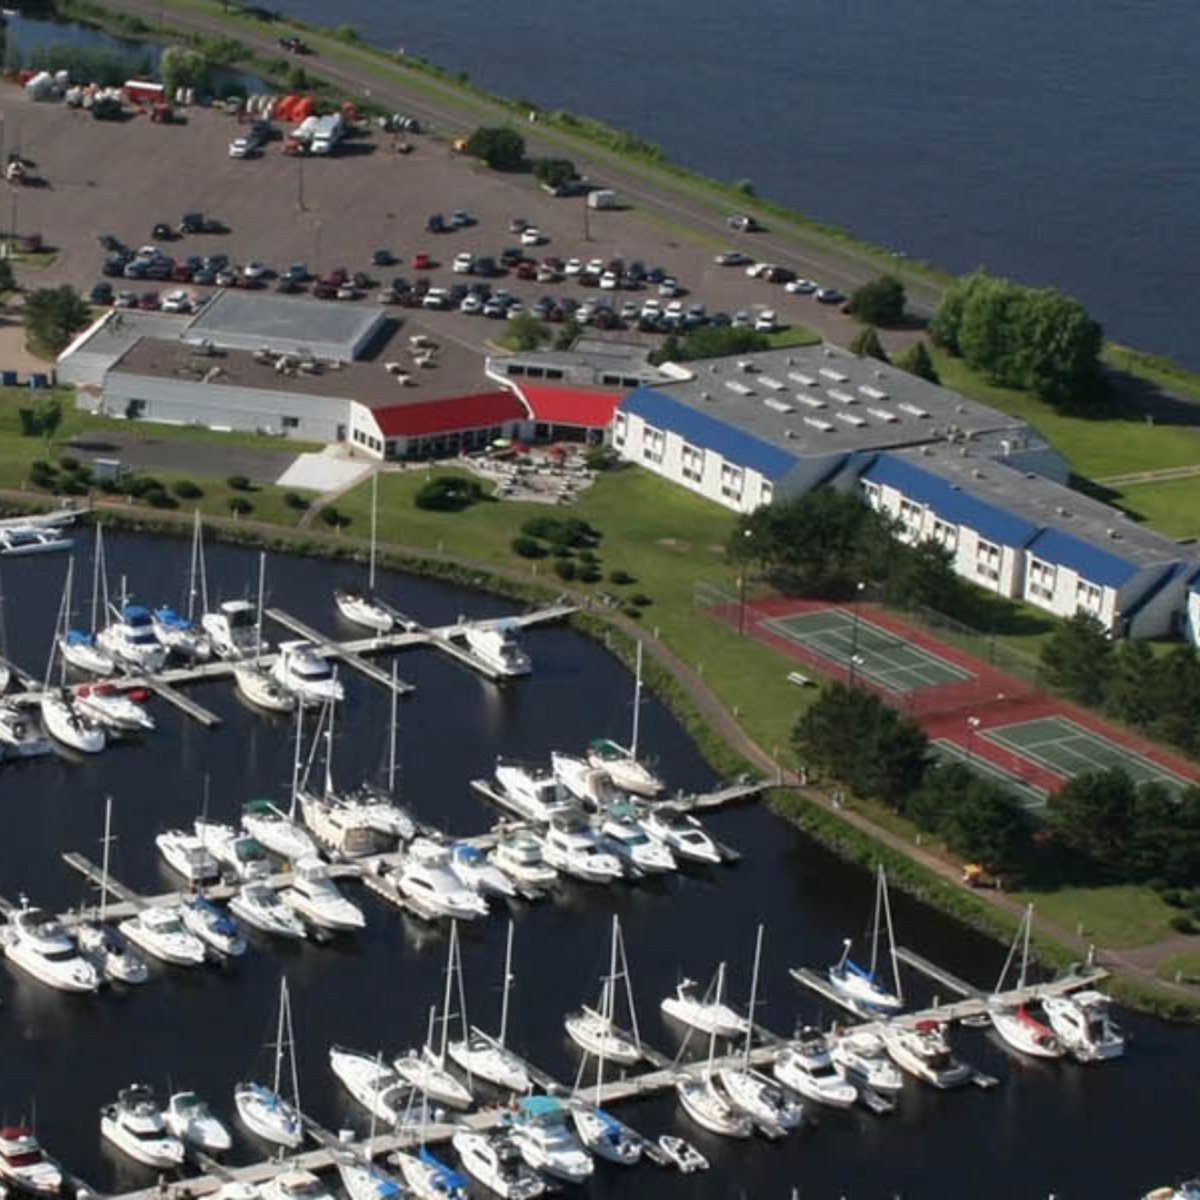 Take a look at Barkers Island Inn Resort & #ConferenceCenter. This independent 111-room property is situated on the harbor of #LakeSuperior and a 425 slip marina. It's perfect for #companyretreats, with a conference center, pool area, lounge and restaurant all under one roof.